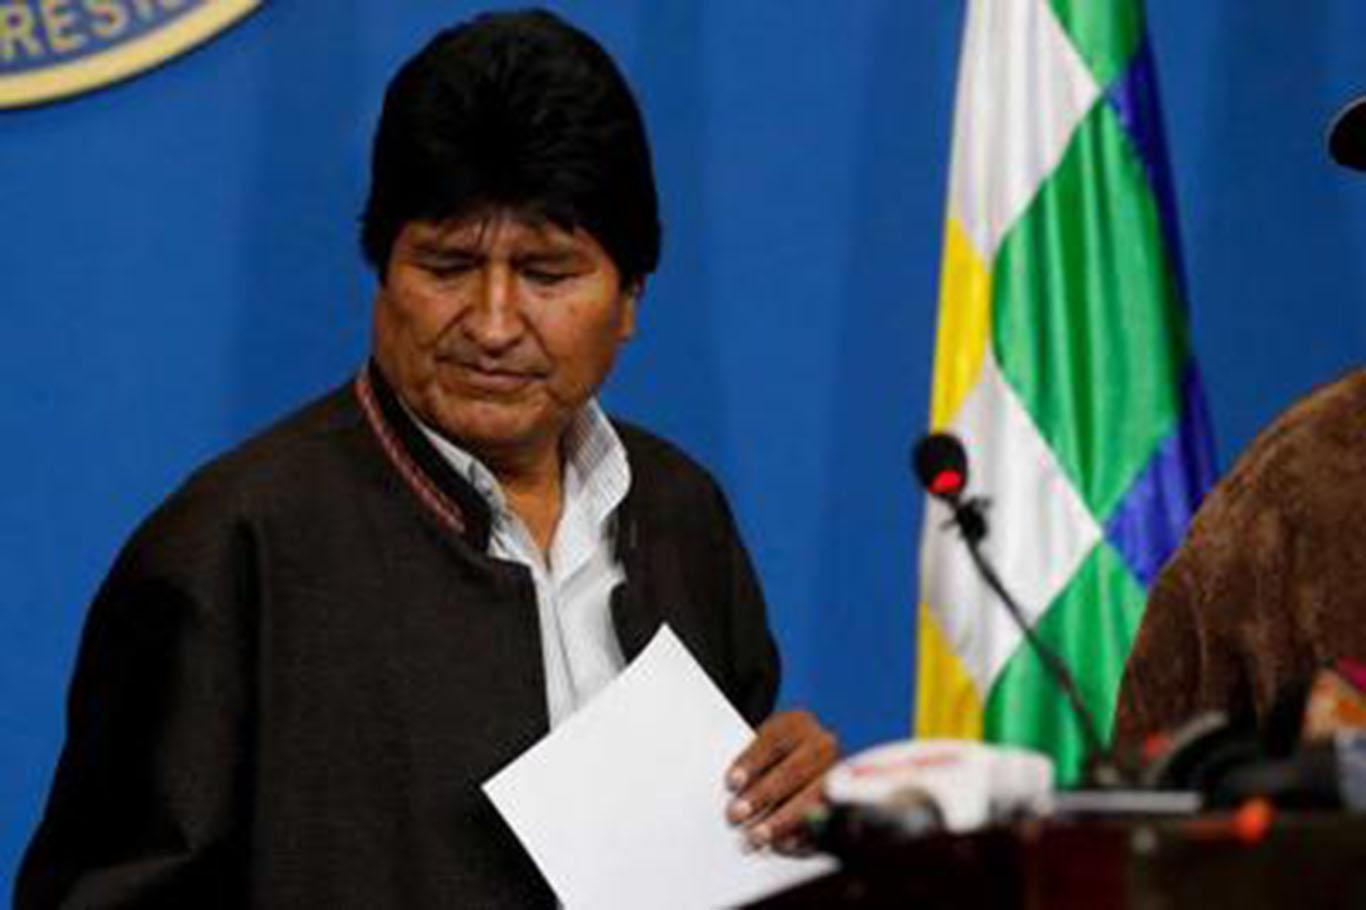 Arrest warrant to be issued against Morales